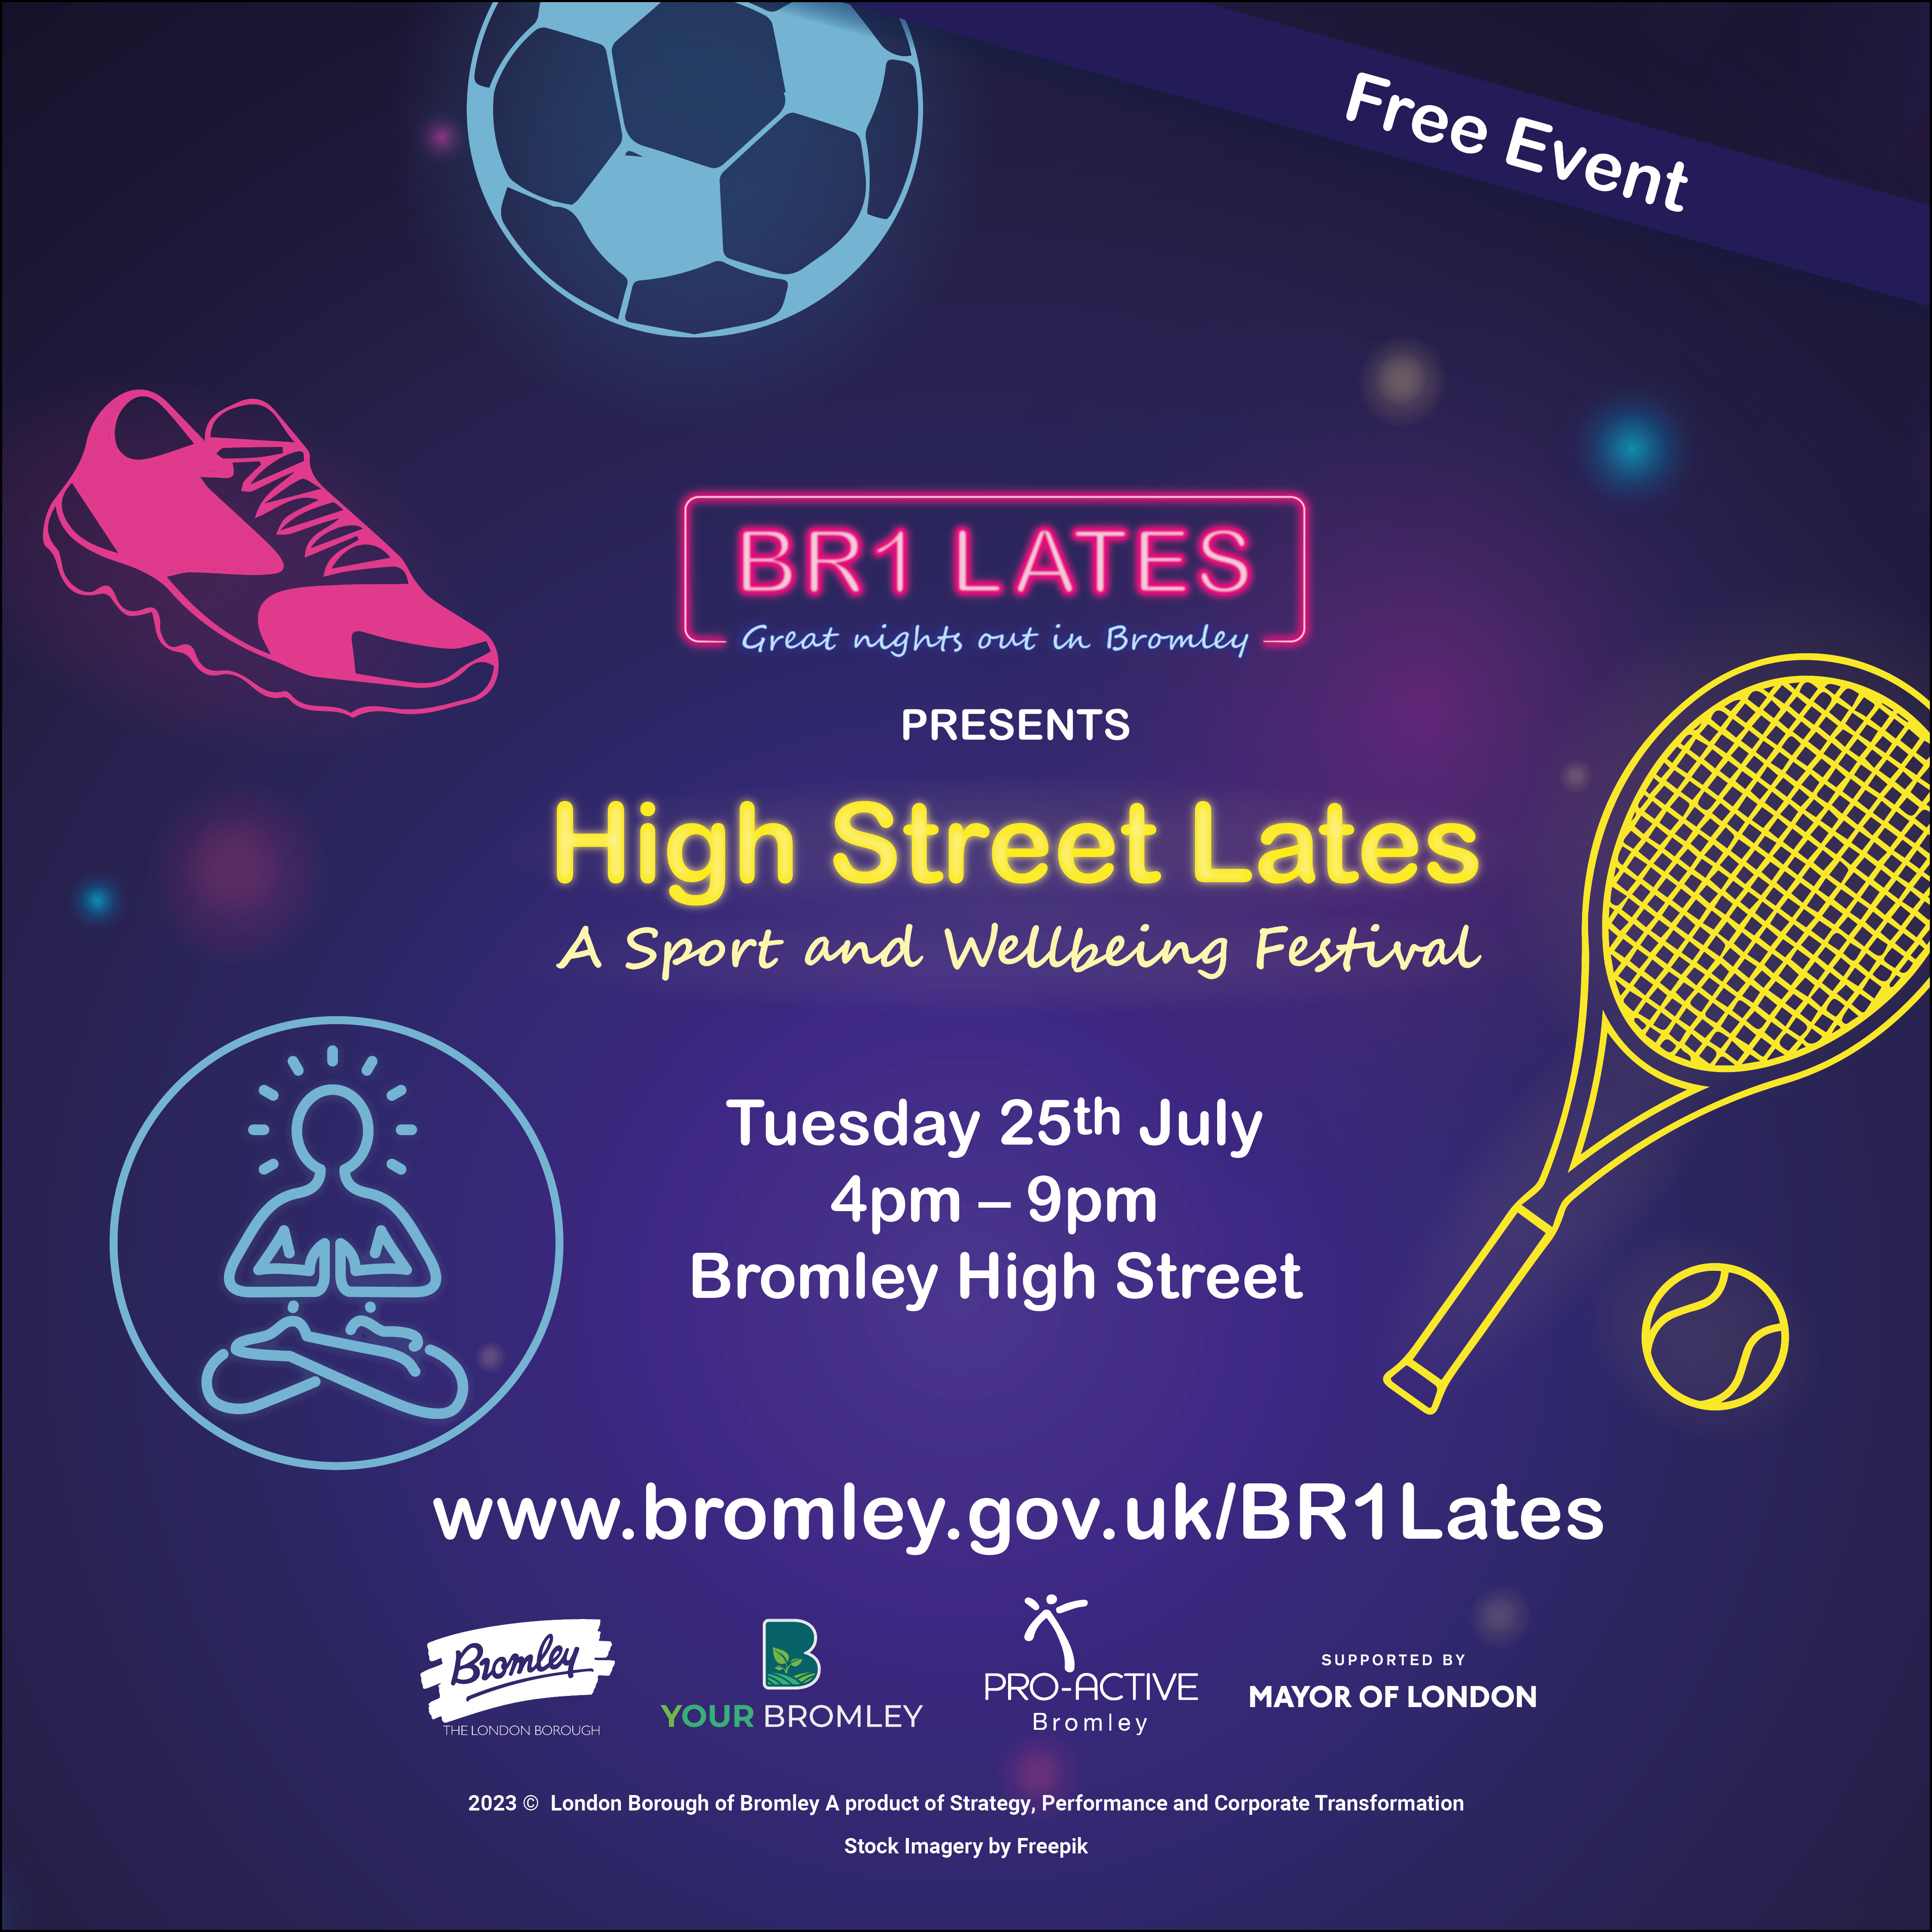 Bromley Lates Festival of Sport and Wellbeing